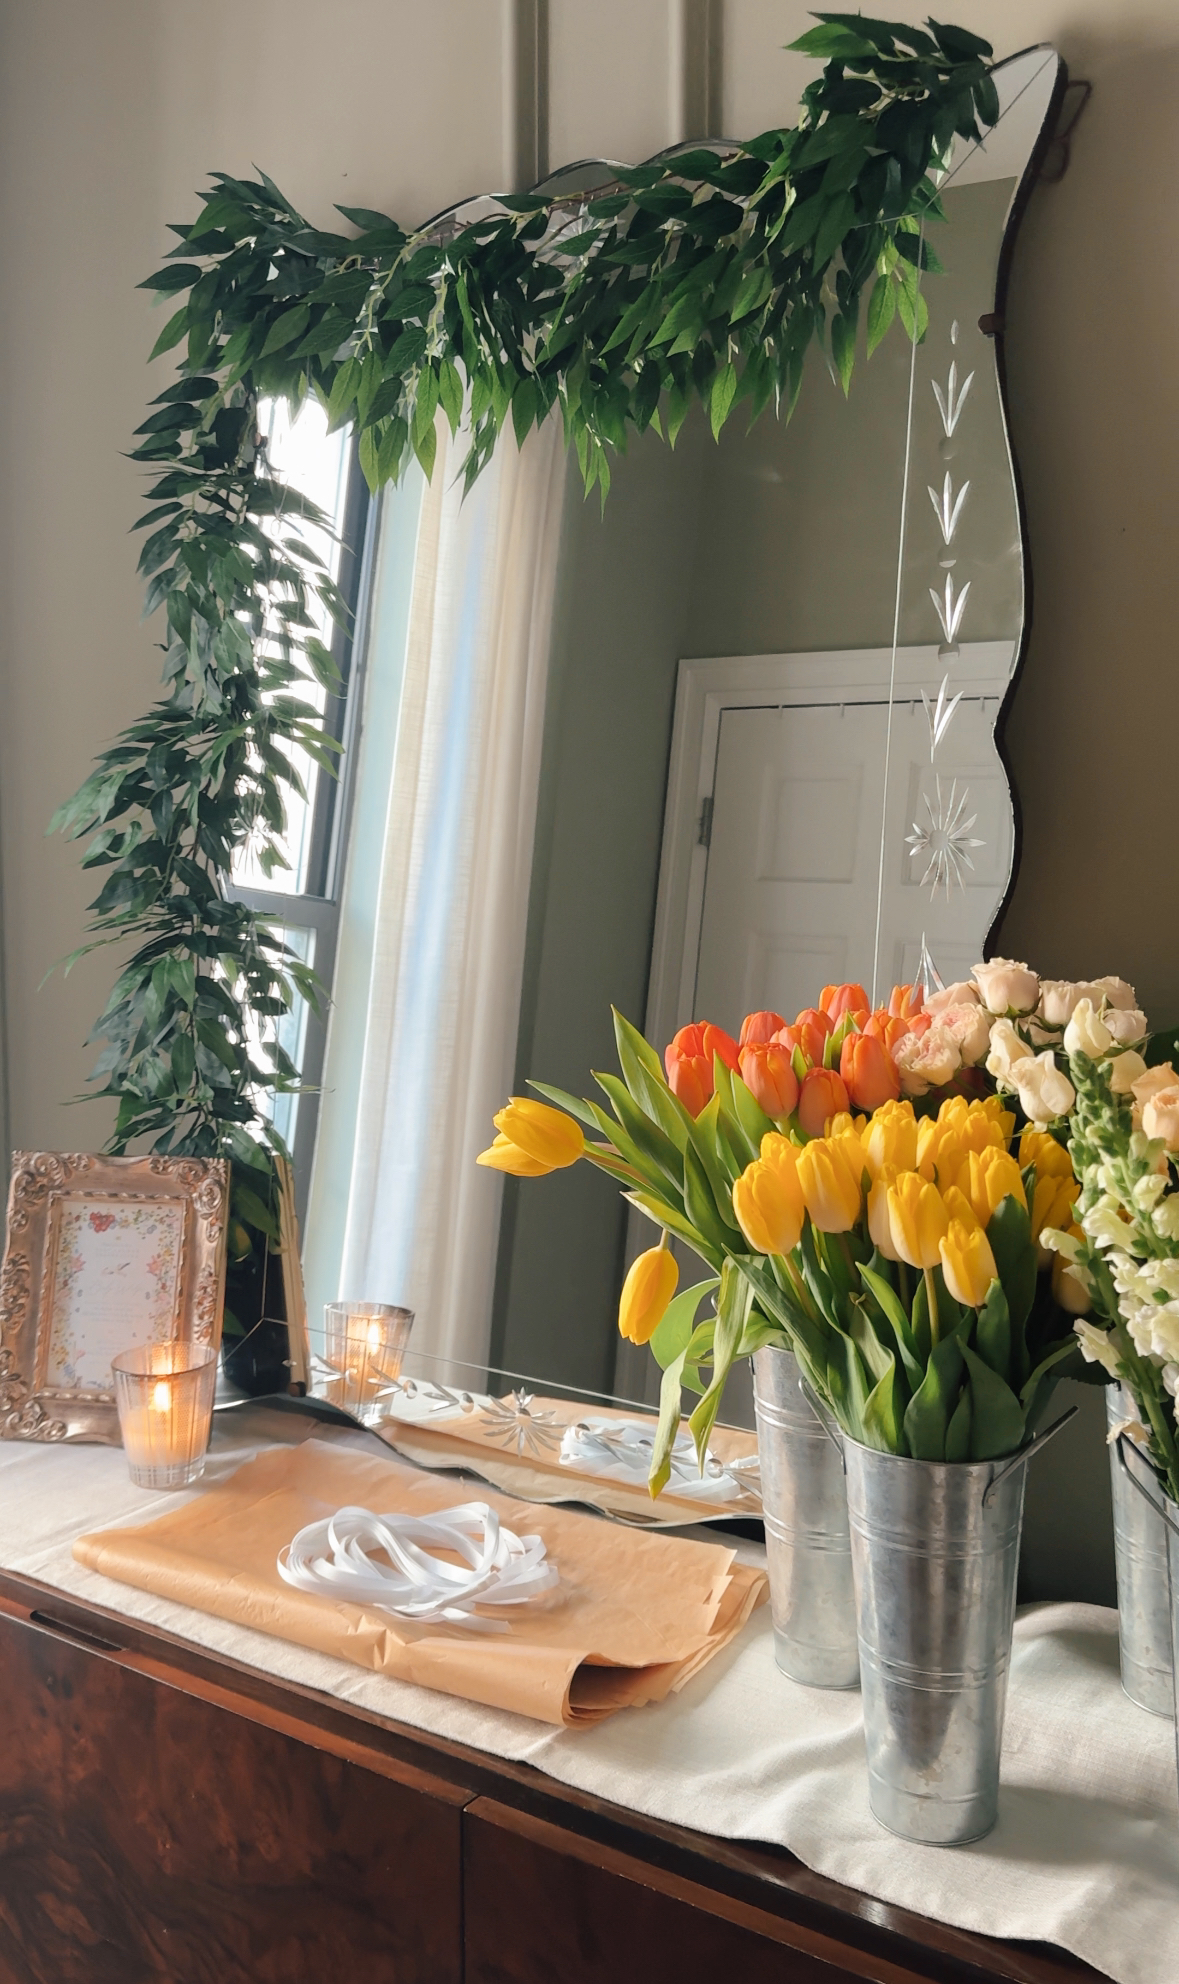 Flowers and baby shower decorations at Anna's Upper East Side apartment